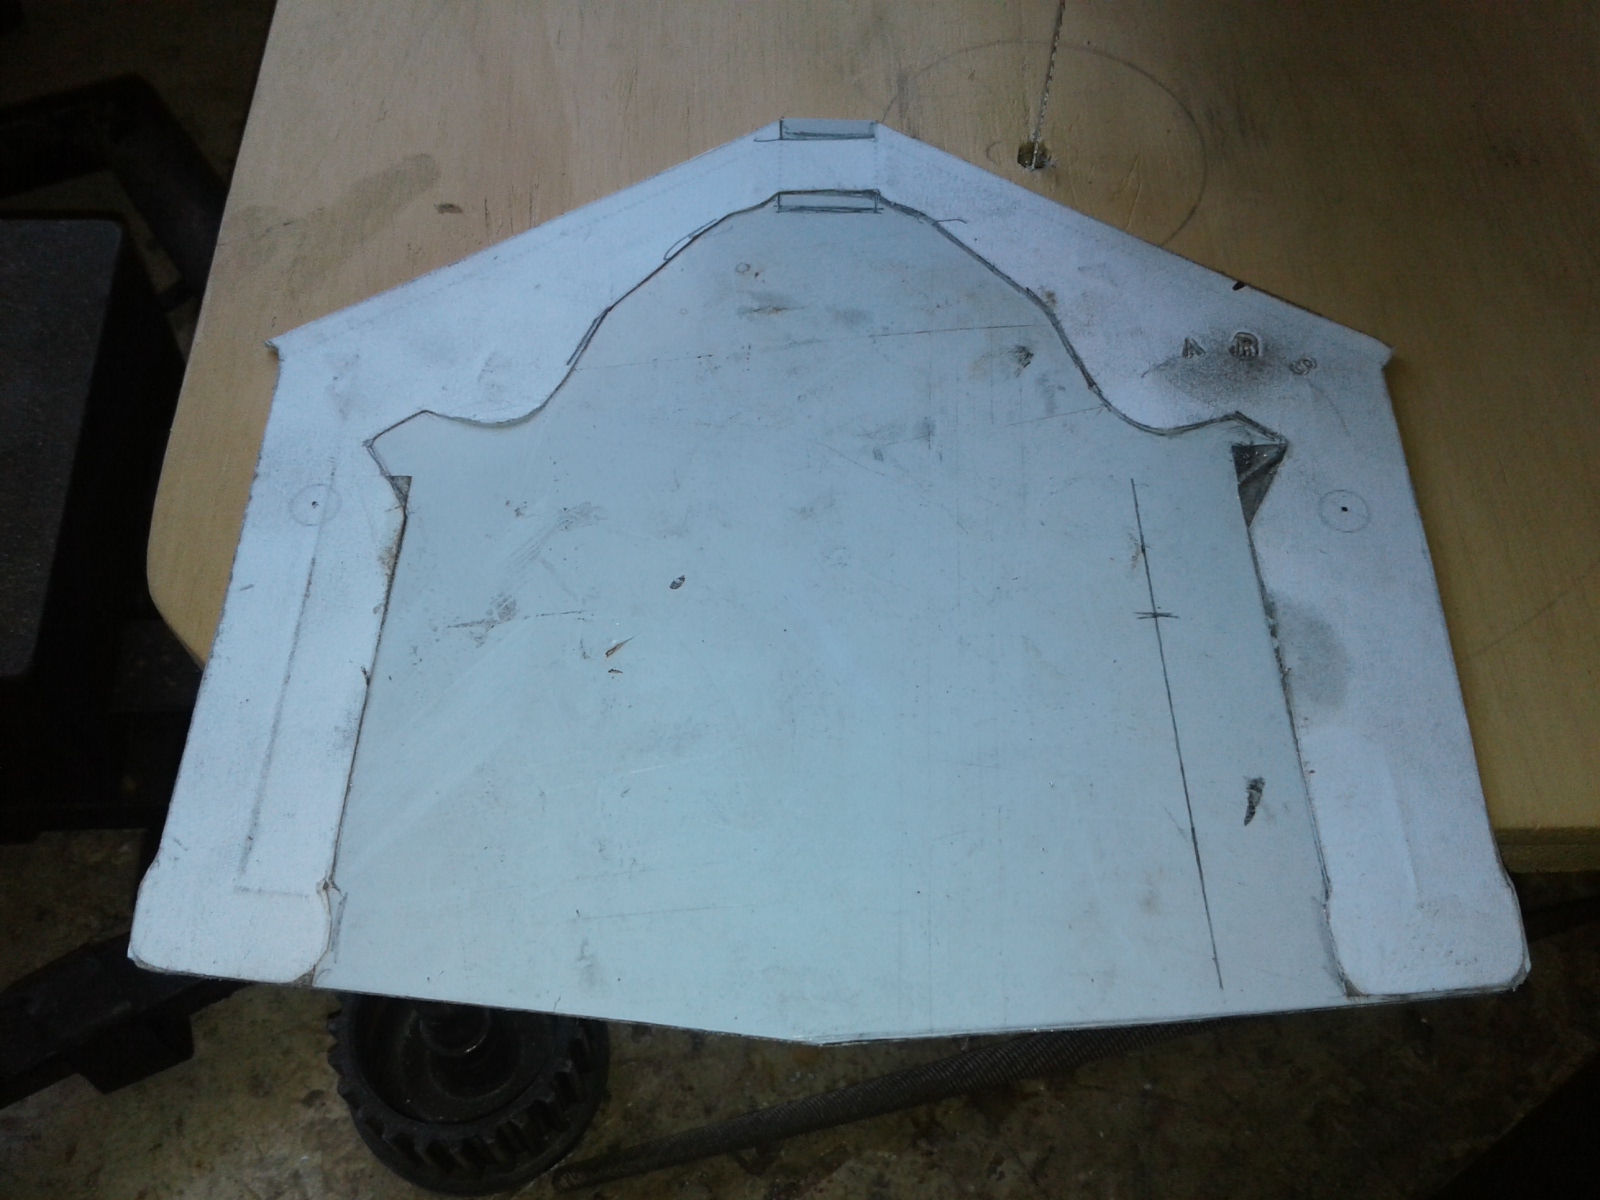 Next step is to cut out this template for the grip mount and fold up and clean the edges